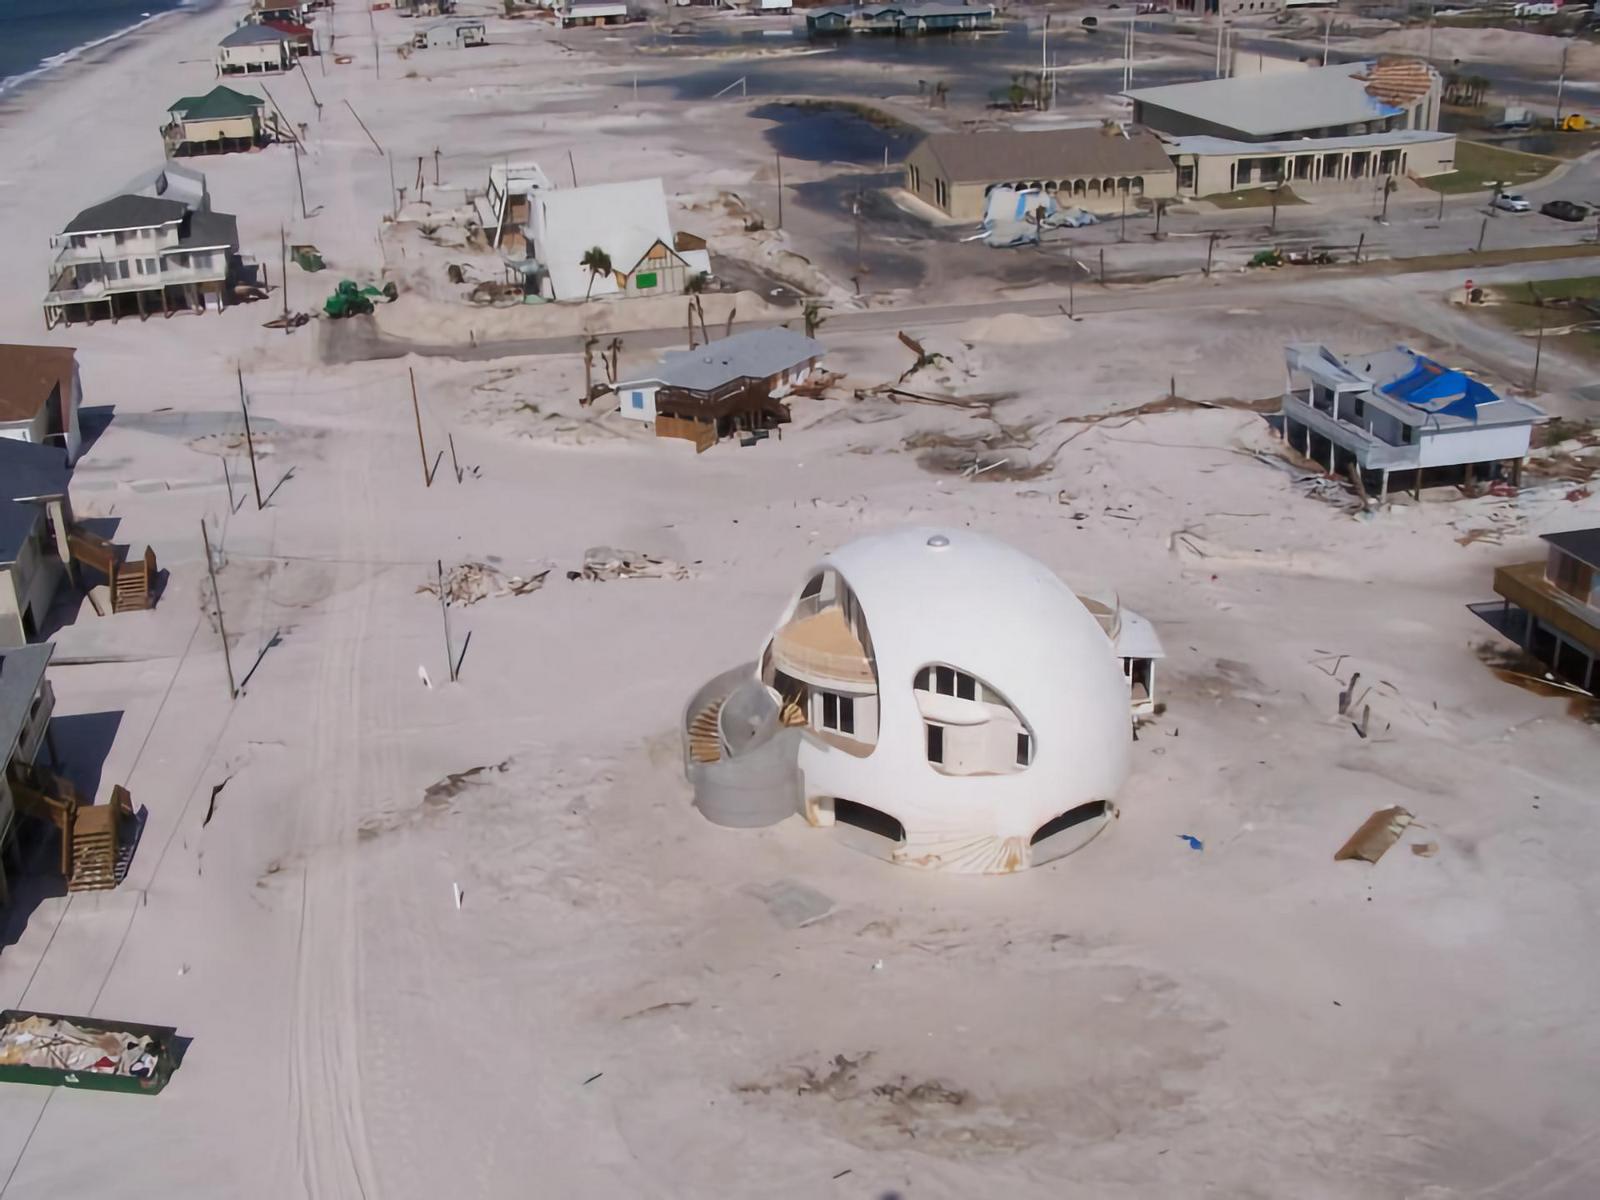 Figure 7: Damage of area surrounding "Dome of a Home"